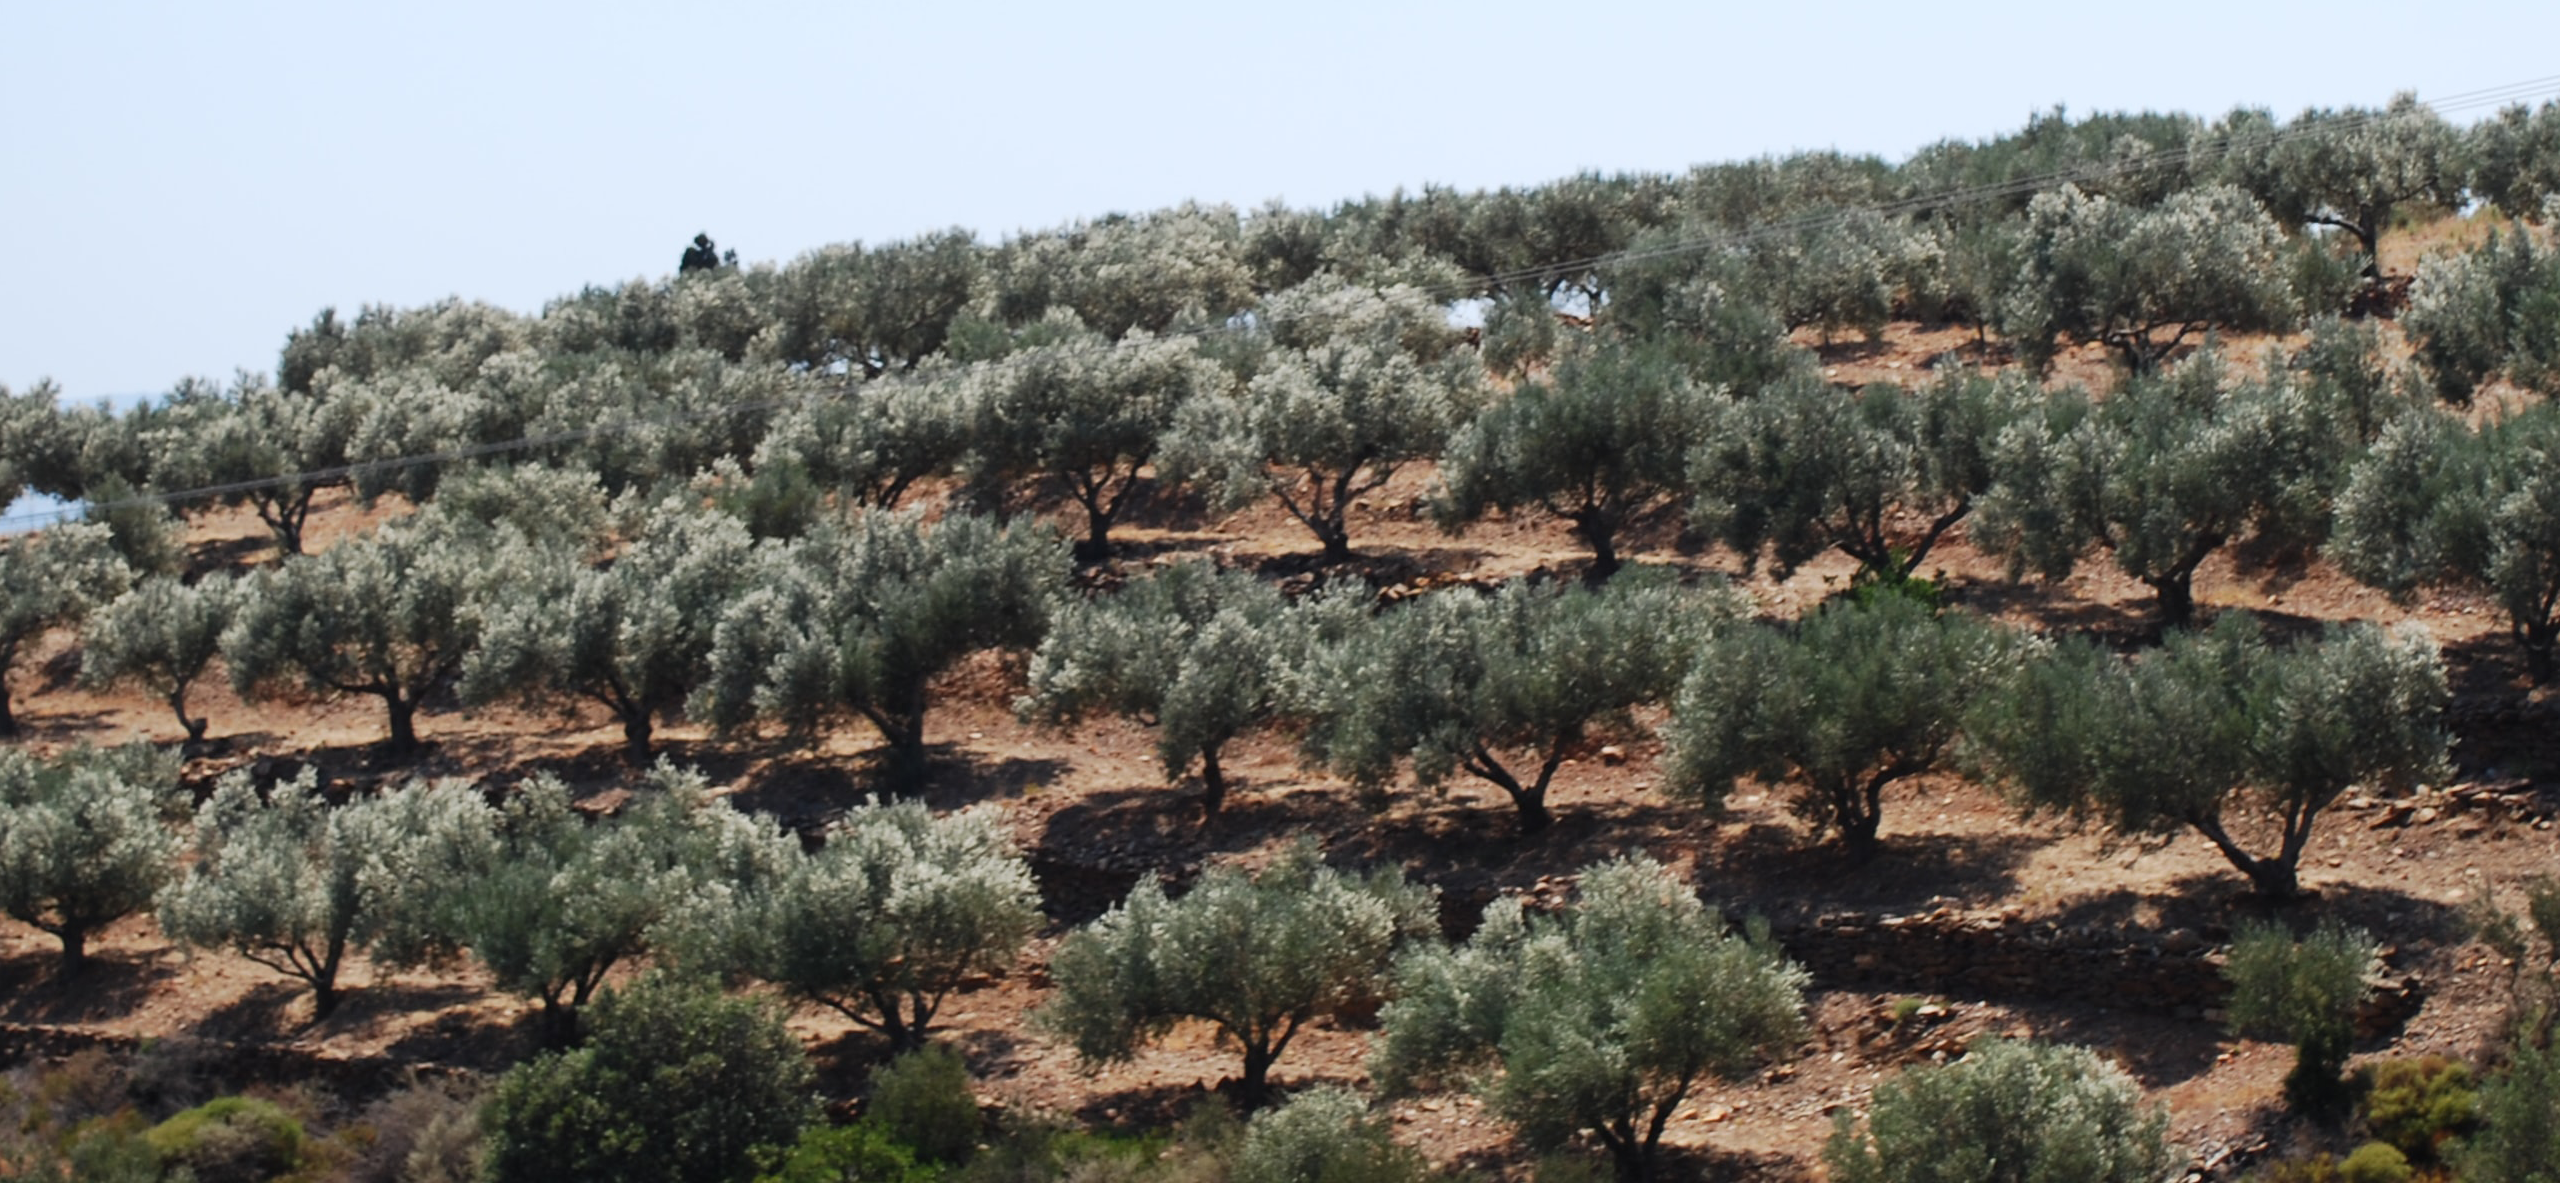 certified origins hilly olive groves